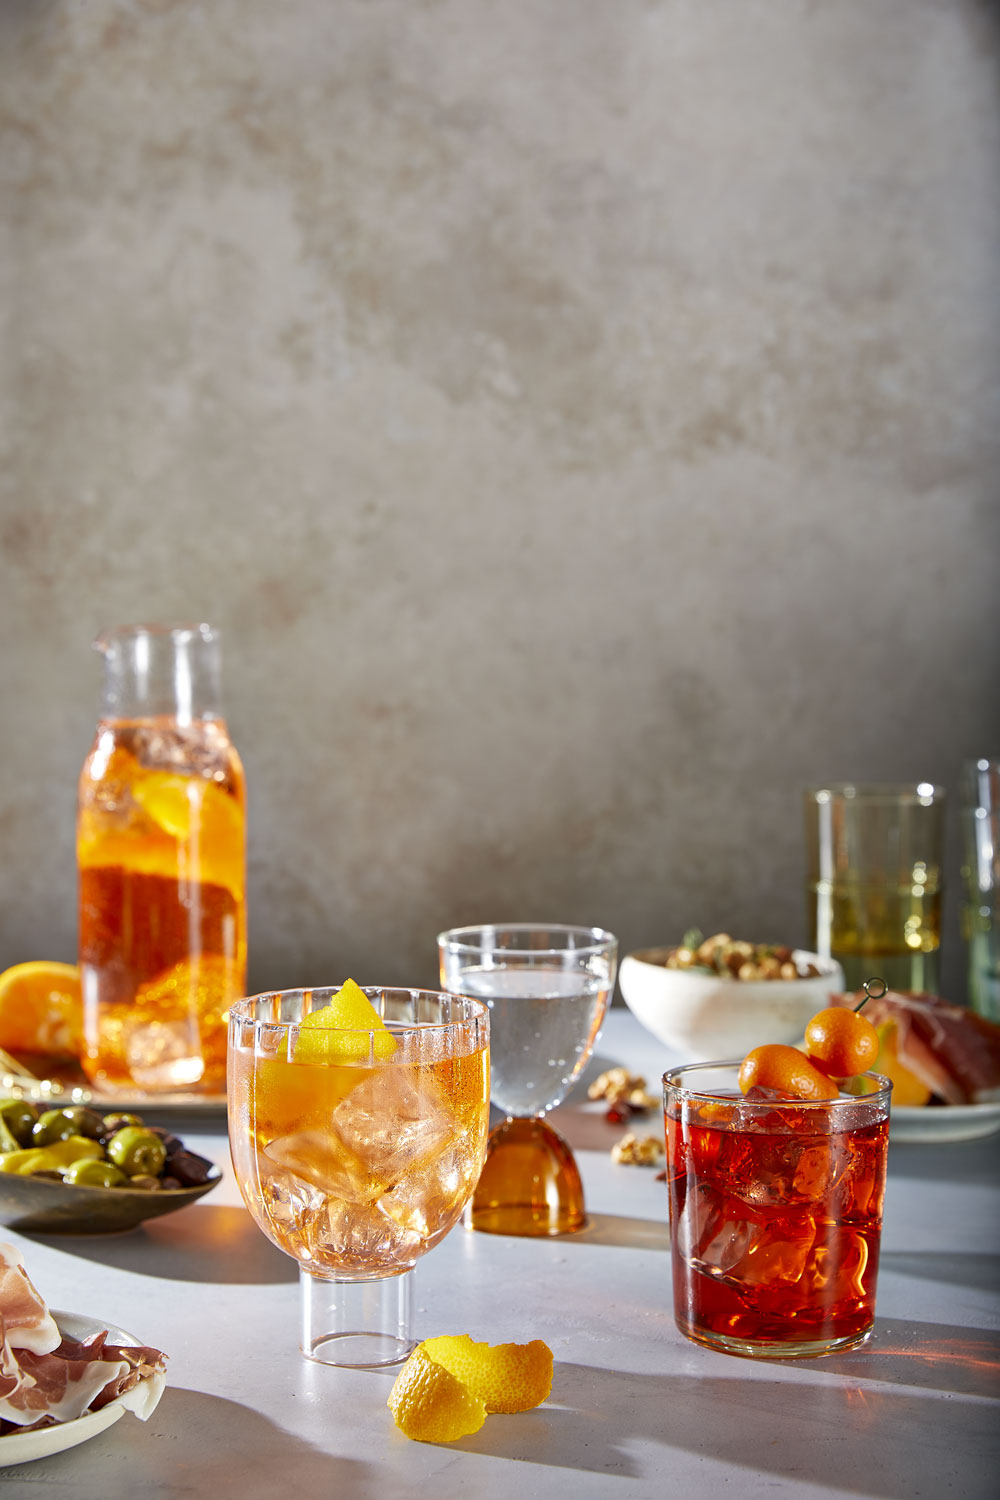 Negroni & Aperol drinks on a table with snacks